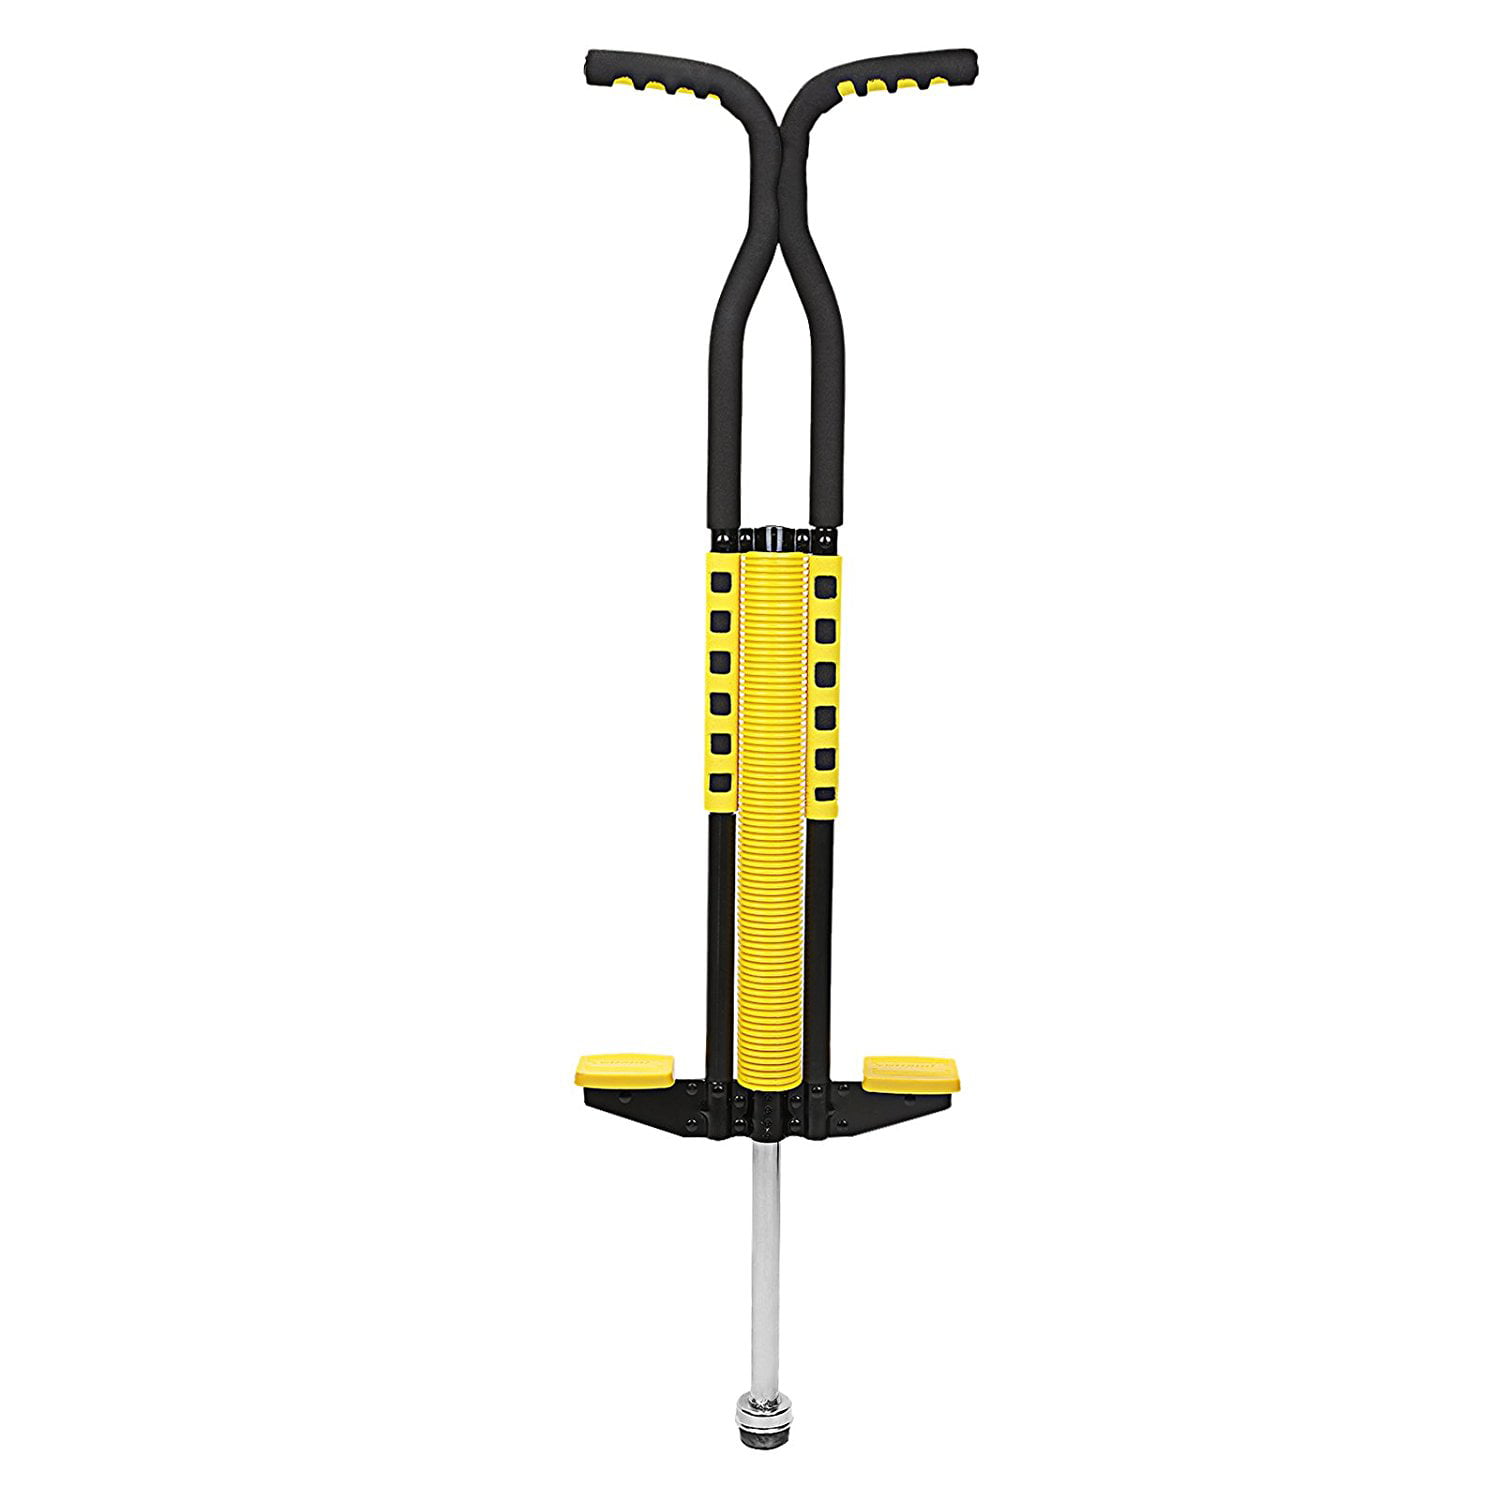 X-MAG Foam Master Pogo Stick For Kids Age 9 Up Adult 80 To 160 Lb Yellow Black 